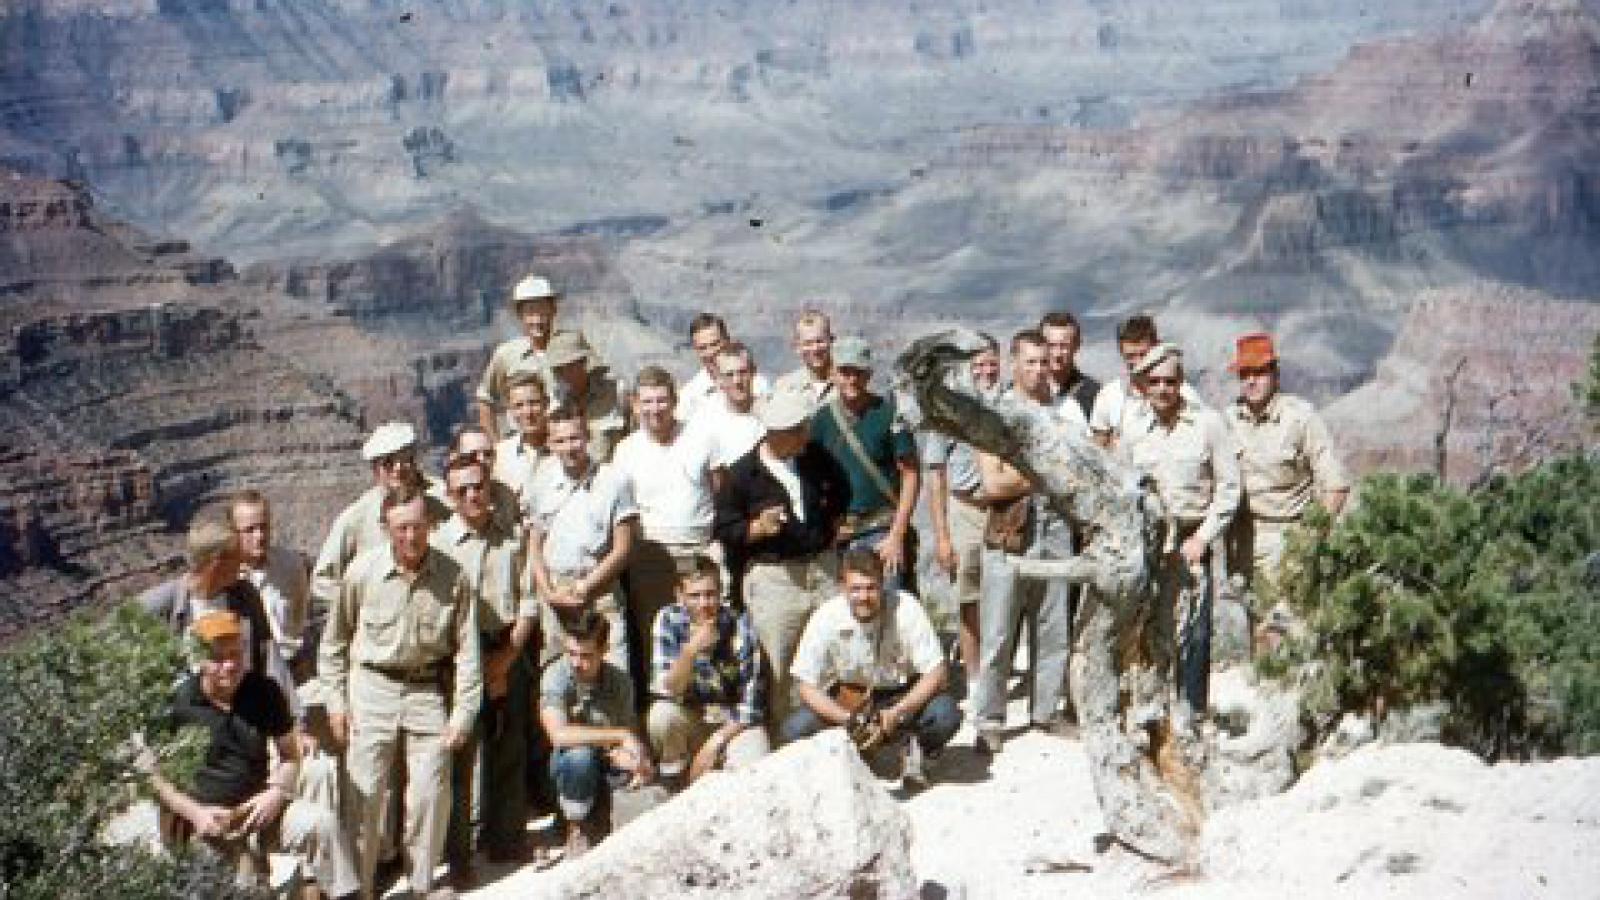 Field Camp group photo from 1955 overlooking a canyon